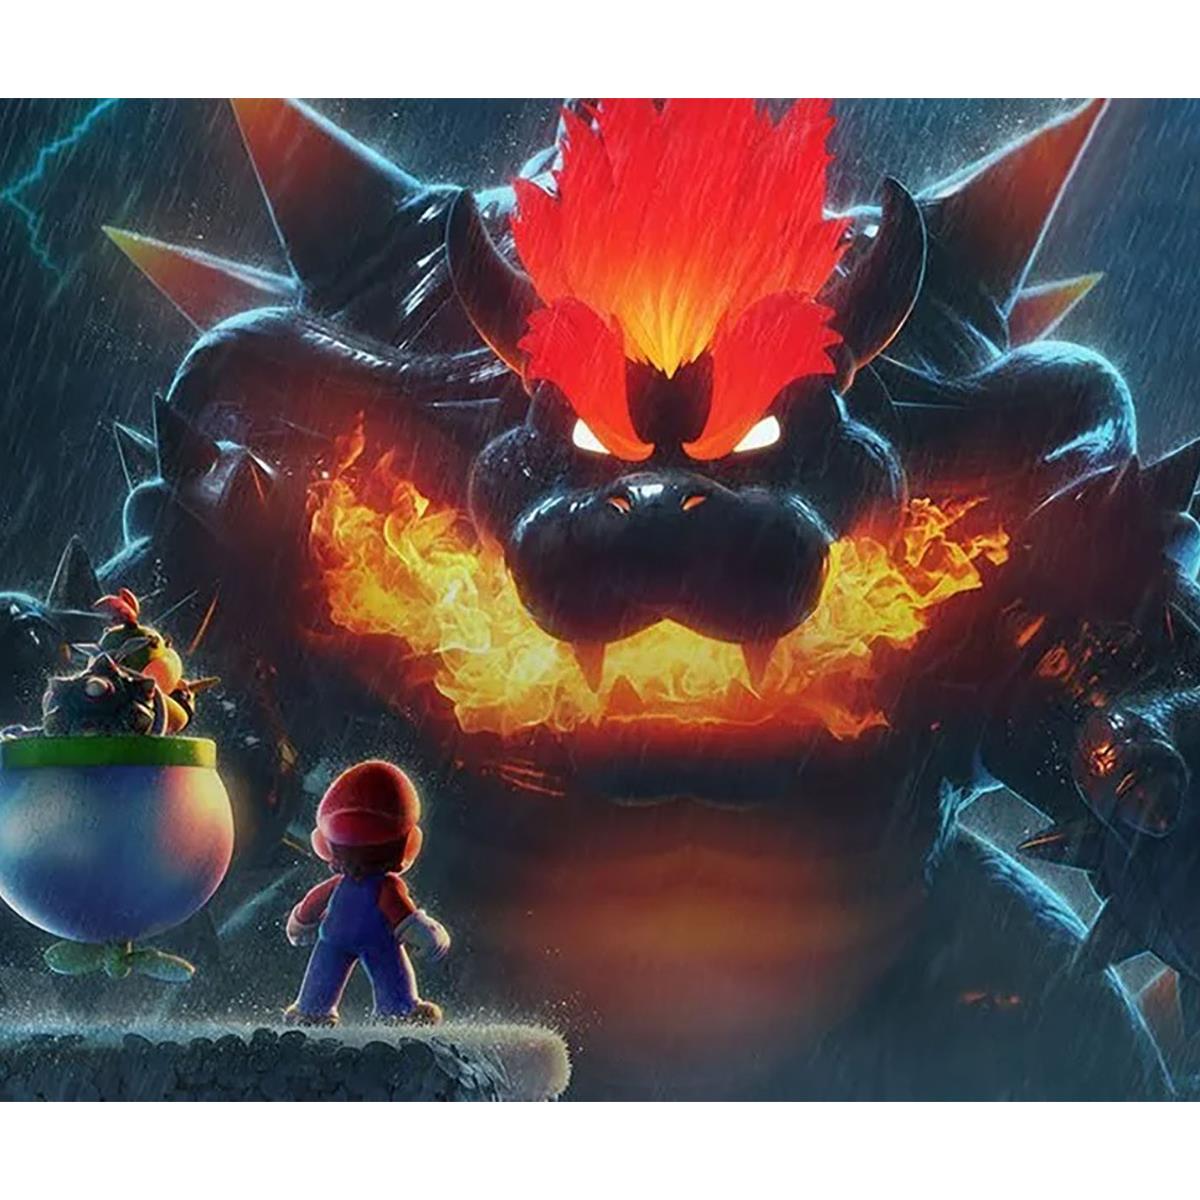 Super Mario 3D World comes to Switch with new Bowser's Fury content in  February 2021